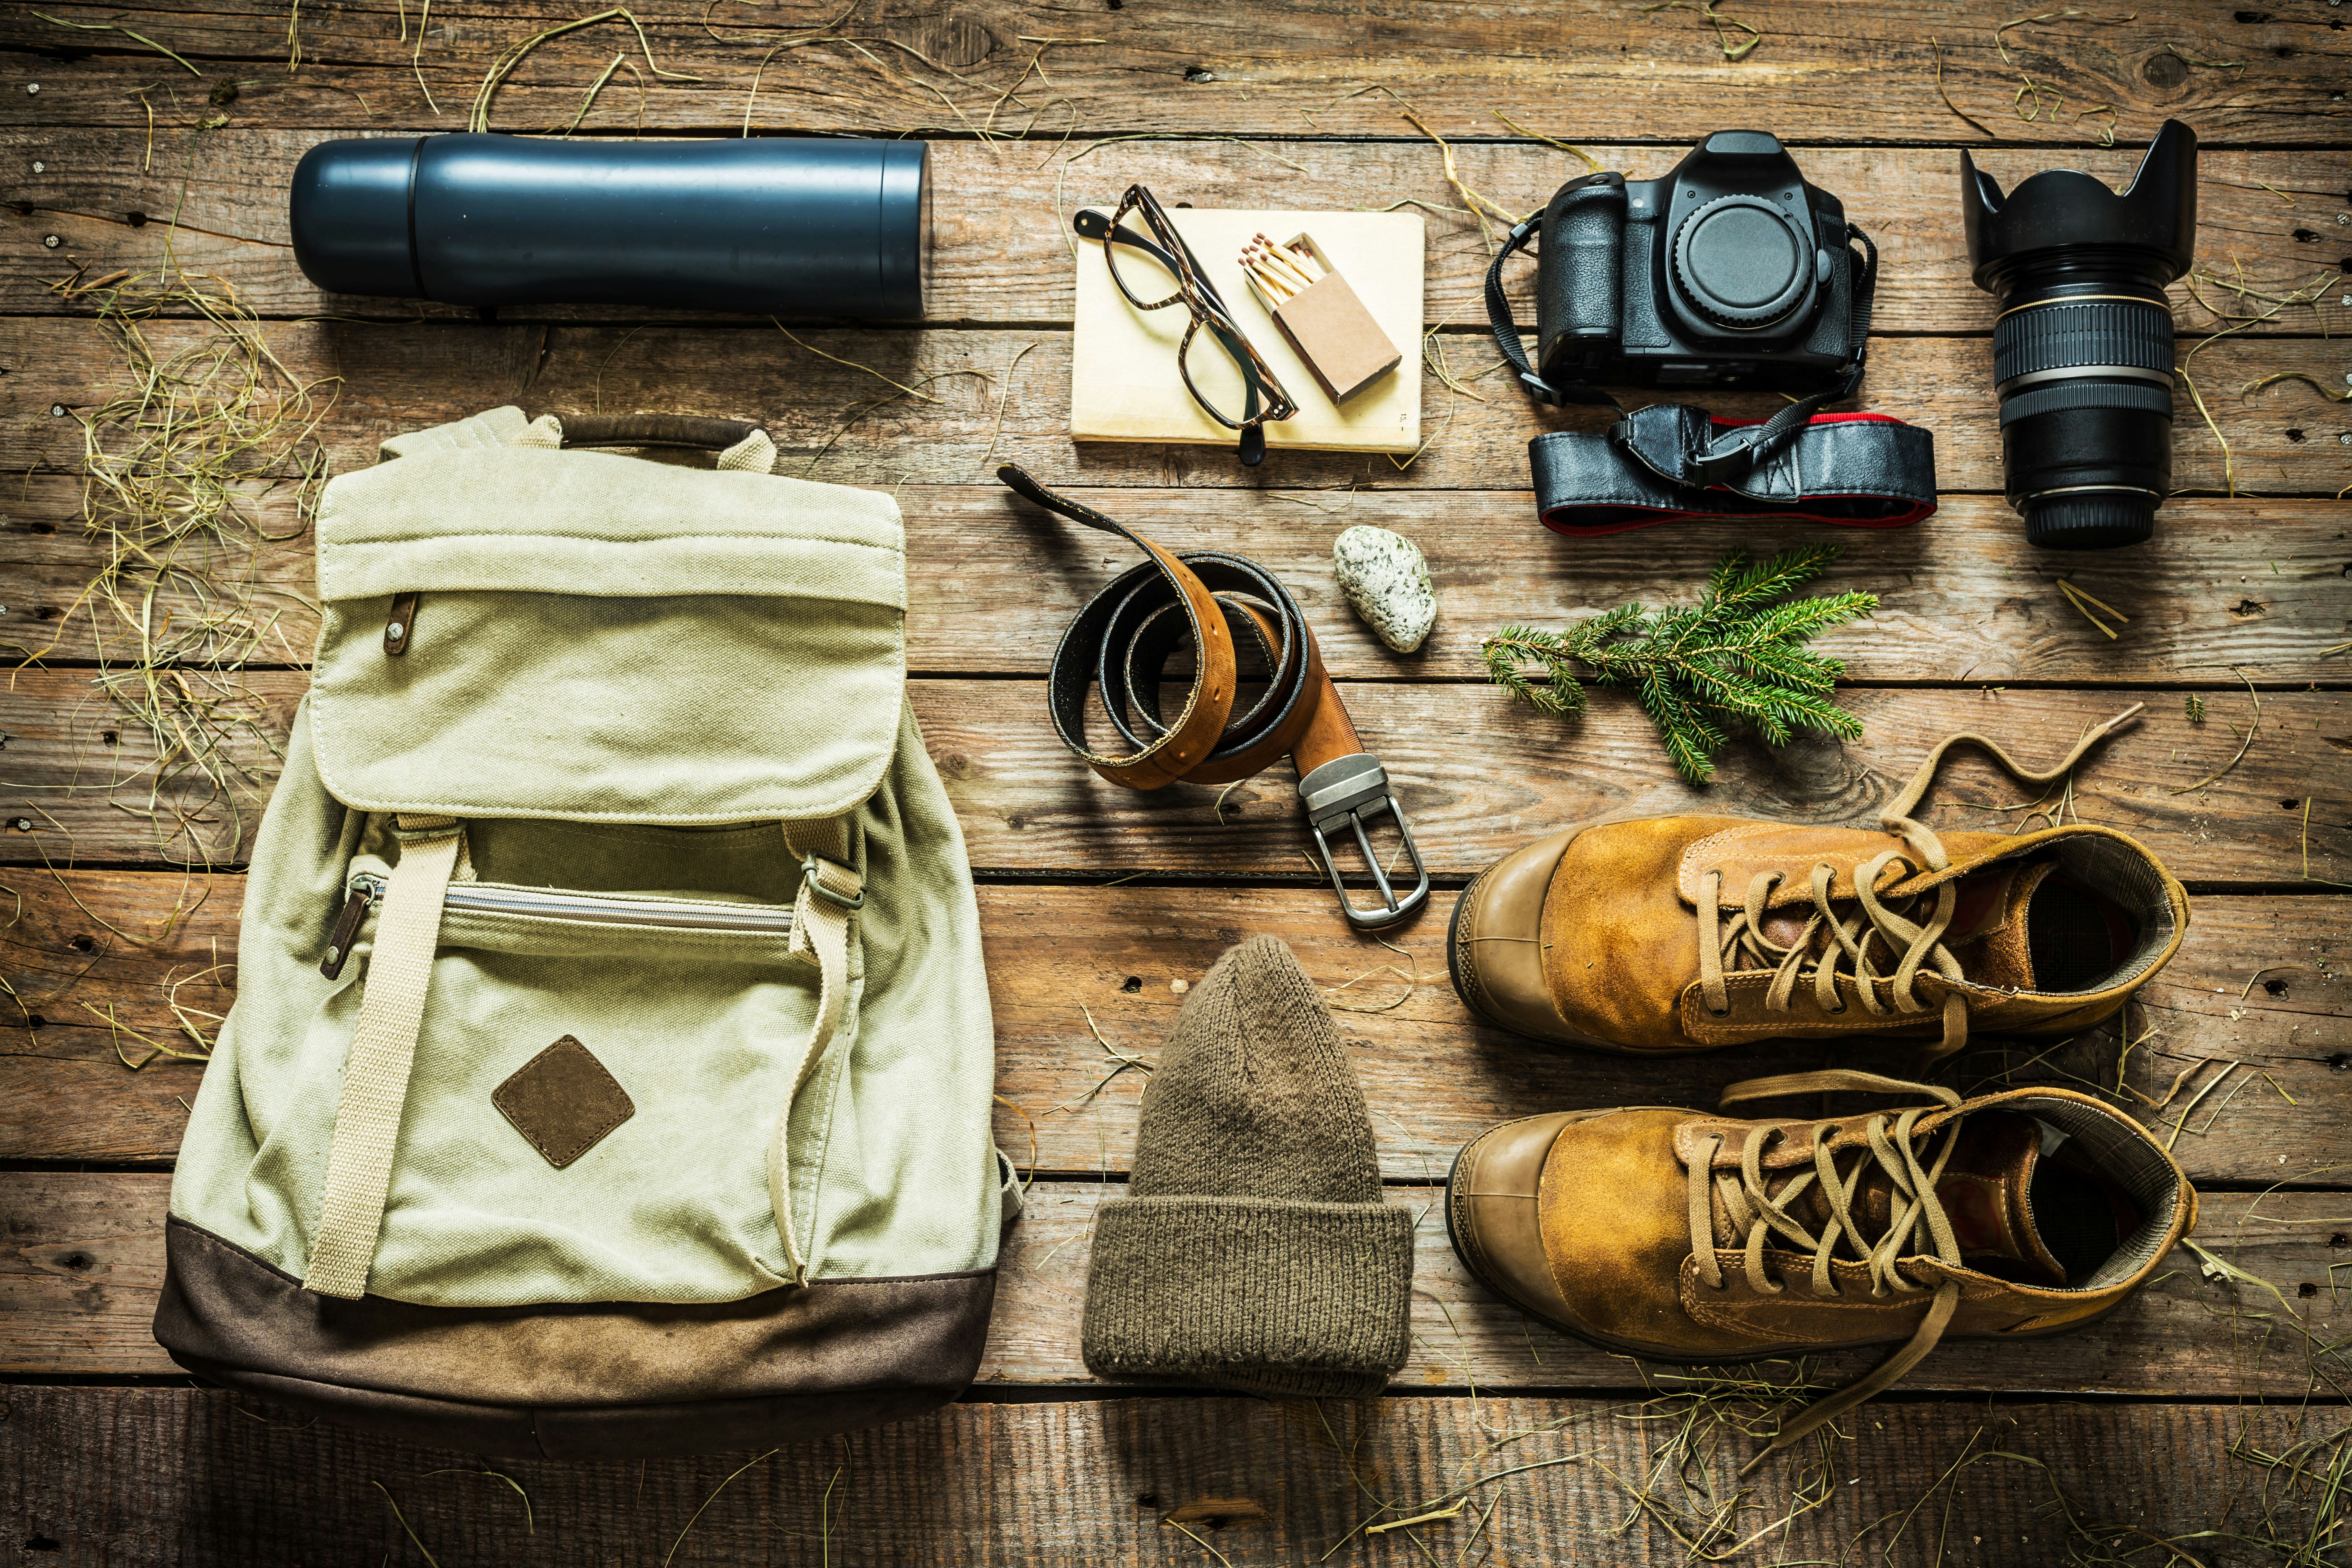 Items including boots, a hat, a belt, a thermos and a camera are laid out neatly on a wooden floor, ready to be packed.